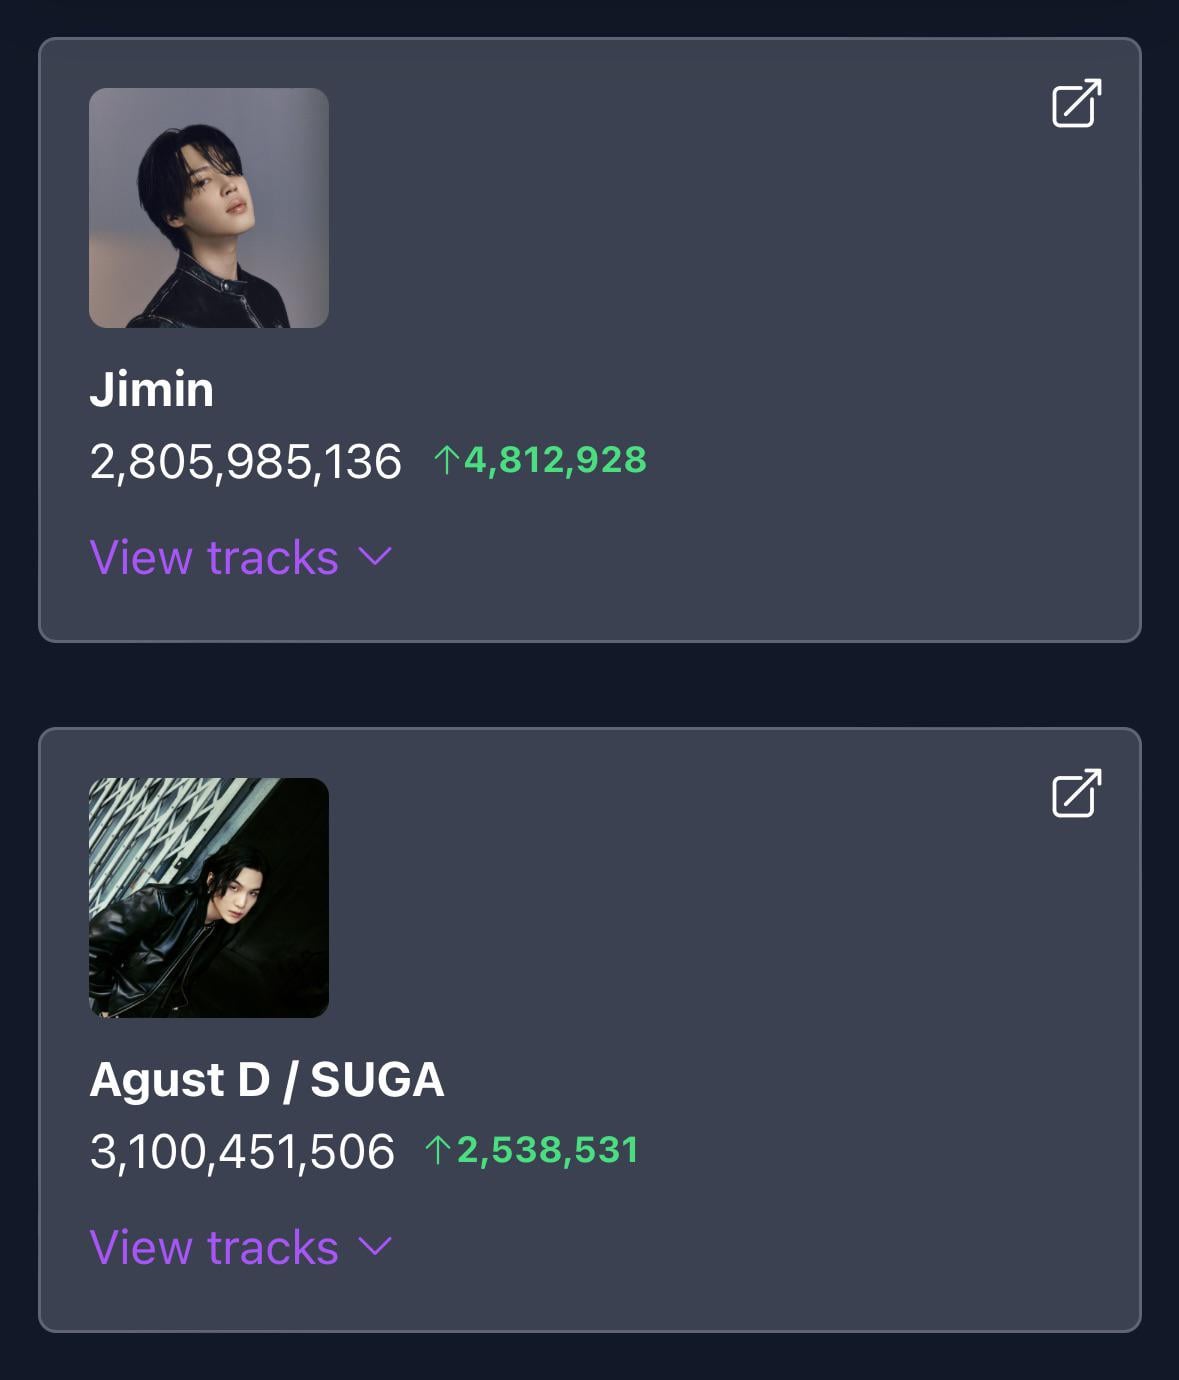 Across all credits on Spotify, Jimin has surpassed 2.8 billion streams and Agust D/SUGA has surpassed 3.1 billion! - 180224